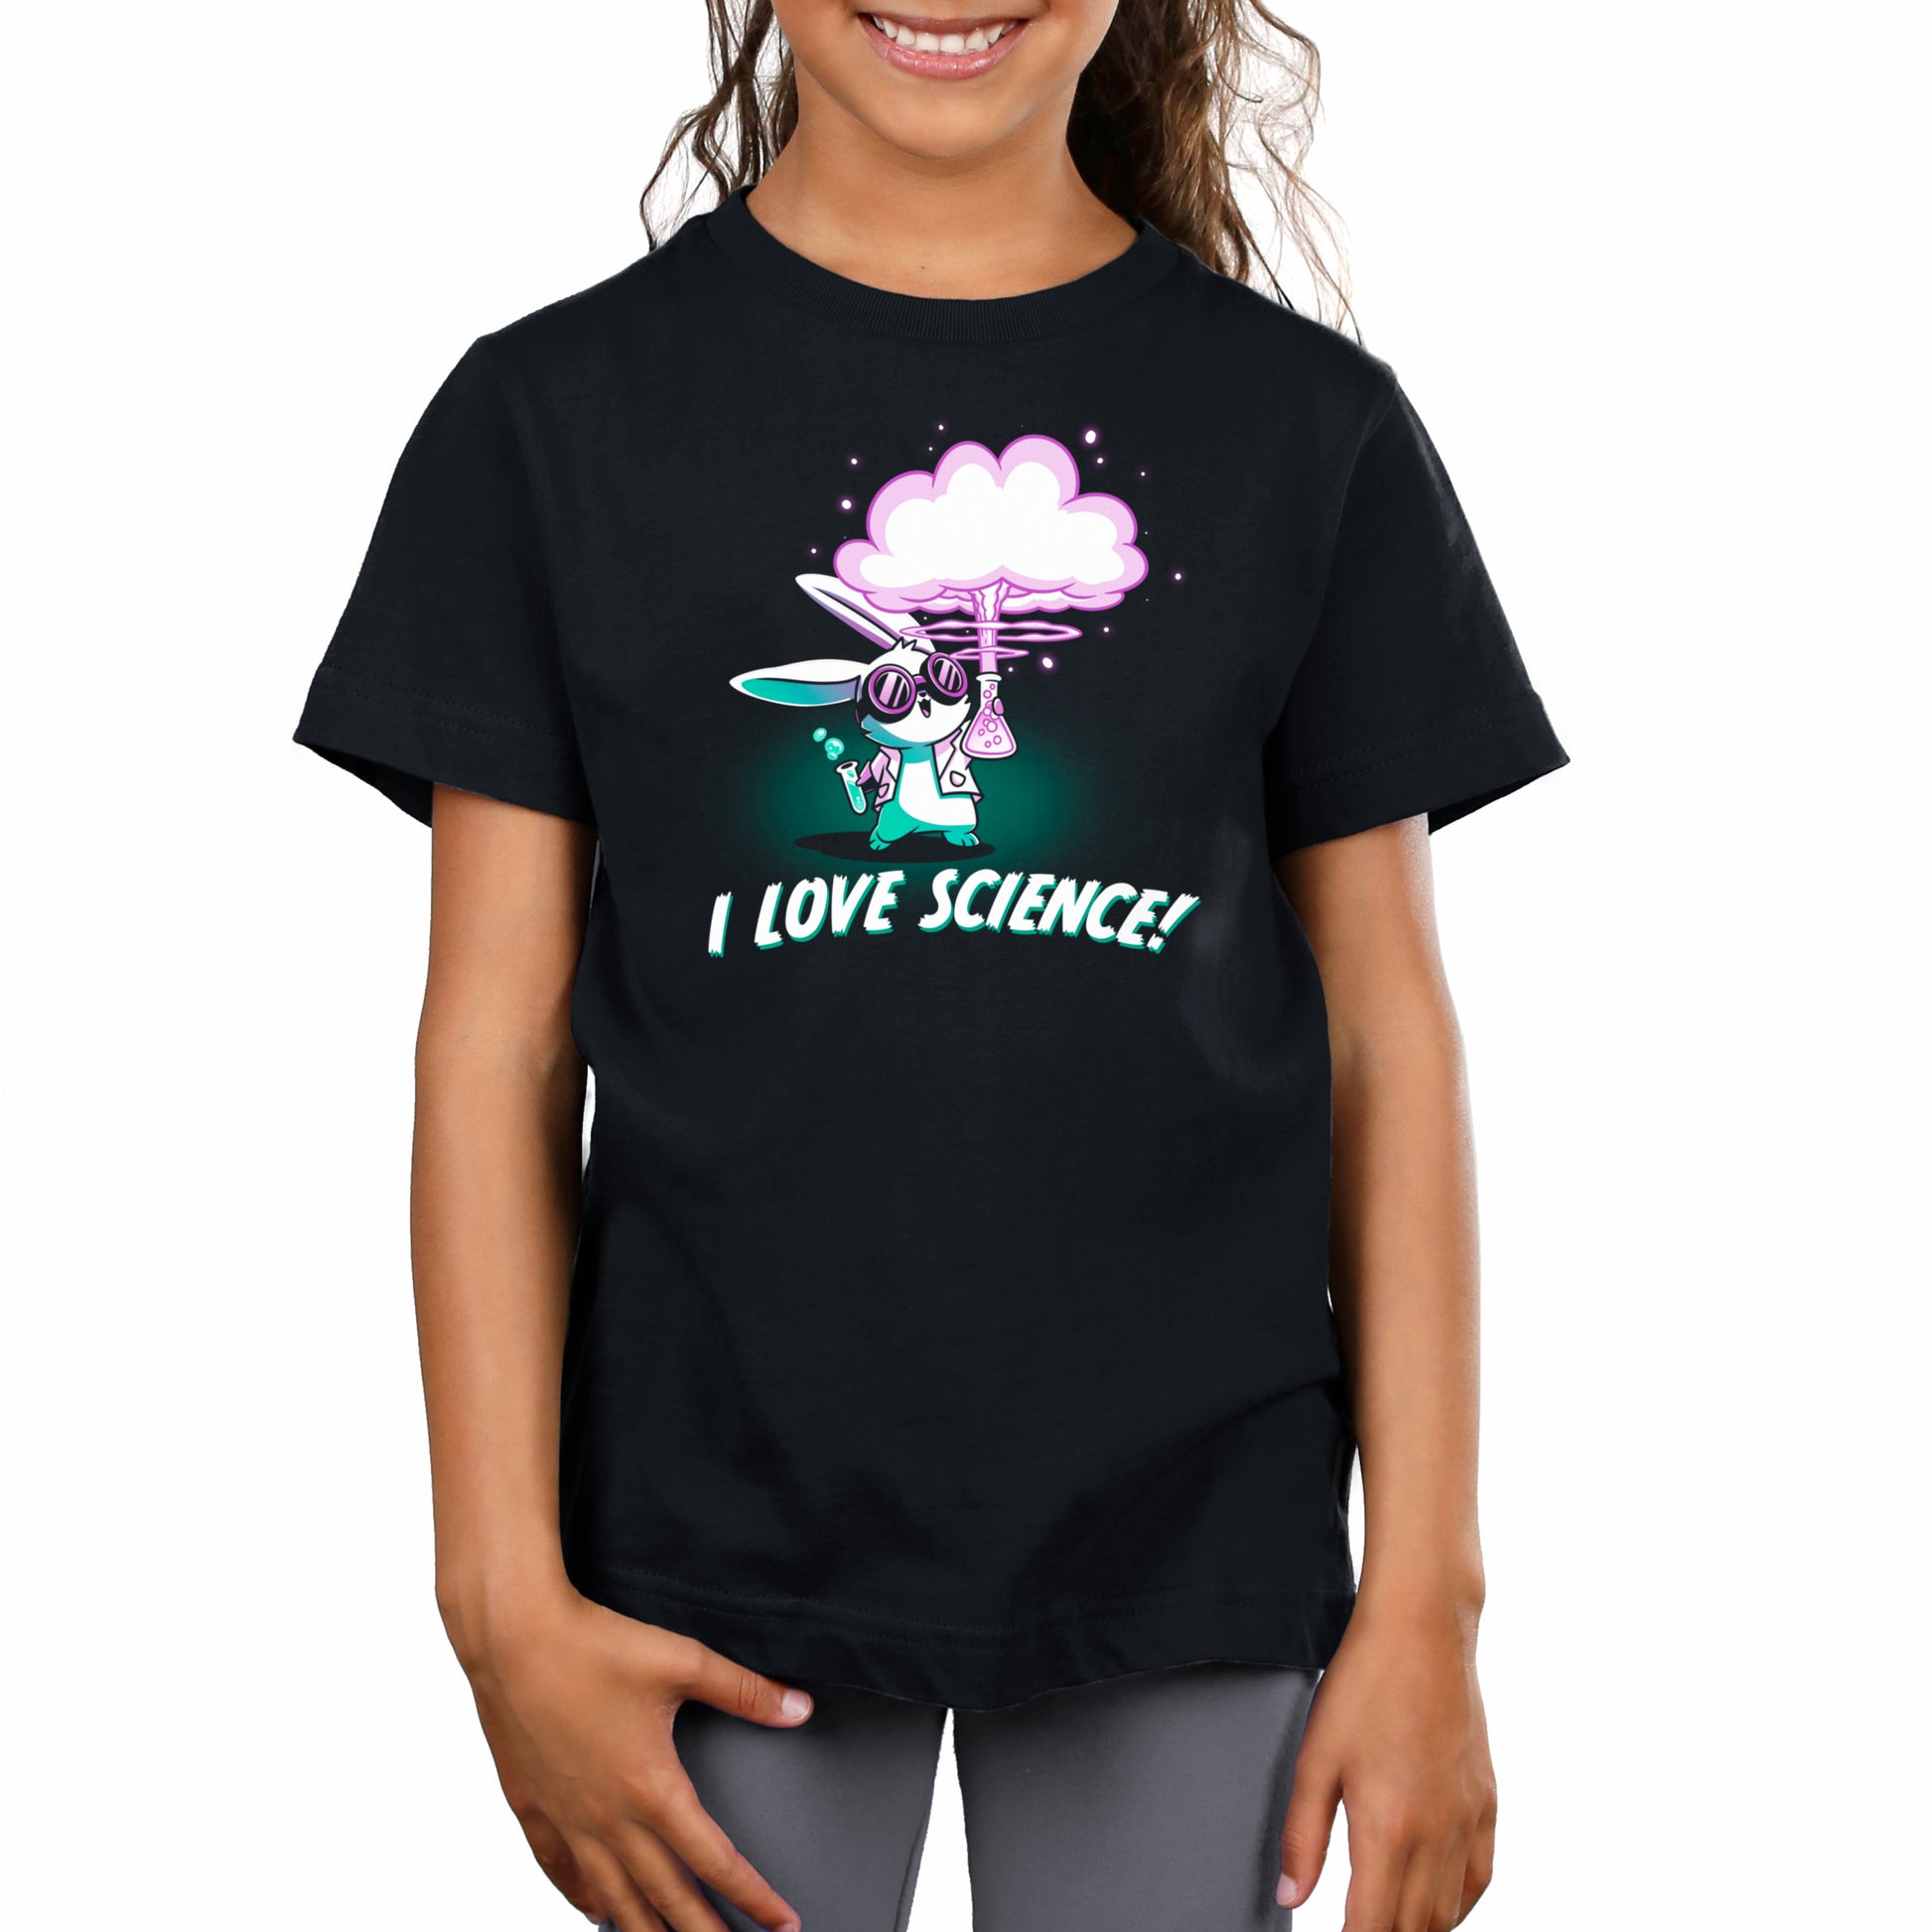 A girl wearing a Teeturtle black t-shirt showing her love for the I Love Science brand.